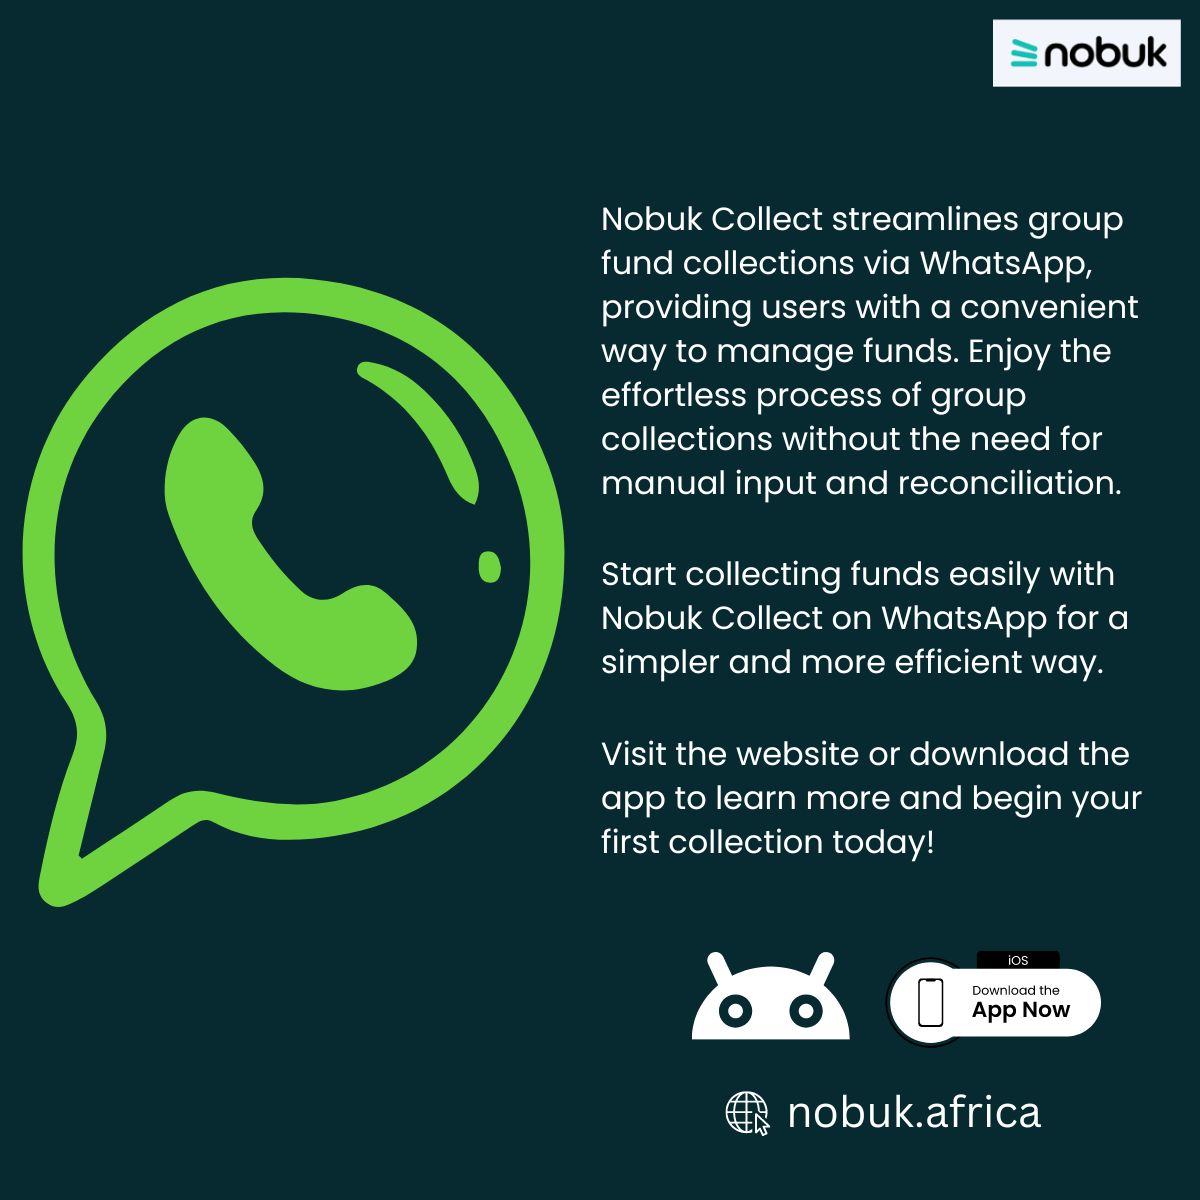 Nobuk Collect simplifies group fund collections through WhatsApp, making it easier for users. Benefit from this seamless approach to group collections without the hassle of manual entry and reconciliation. #NobukCollect #WhatsApp #GroupCollections #SimplifyYourLife